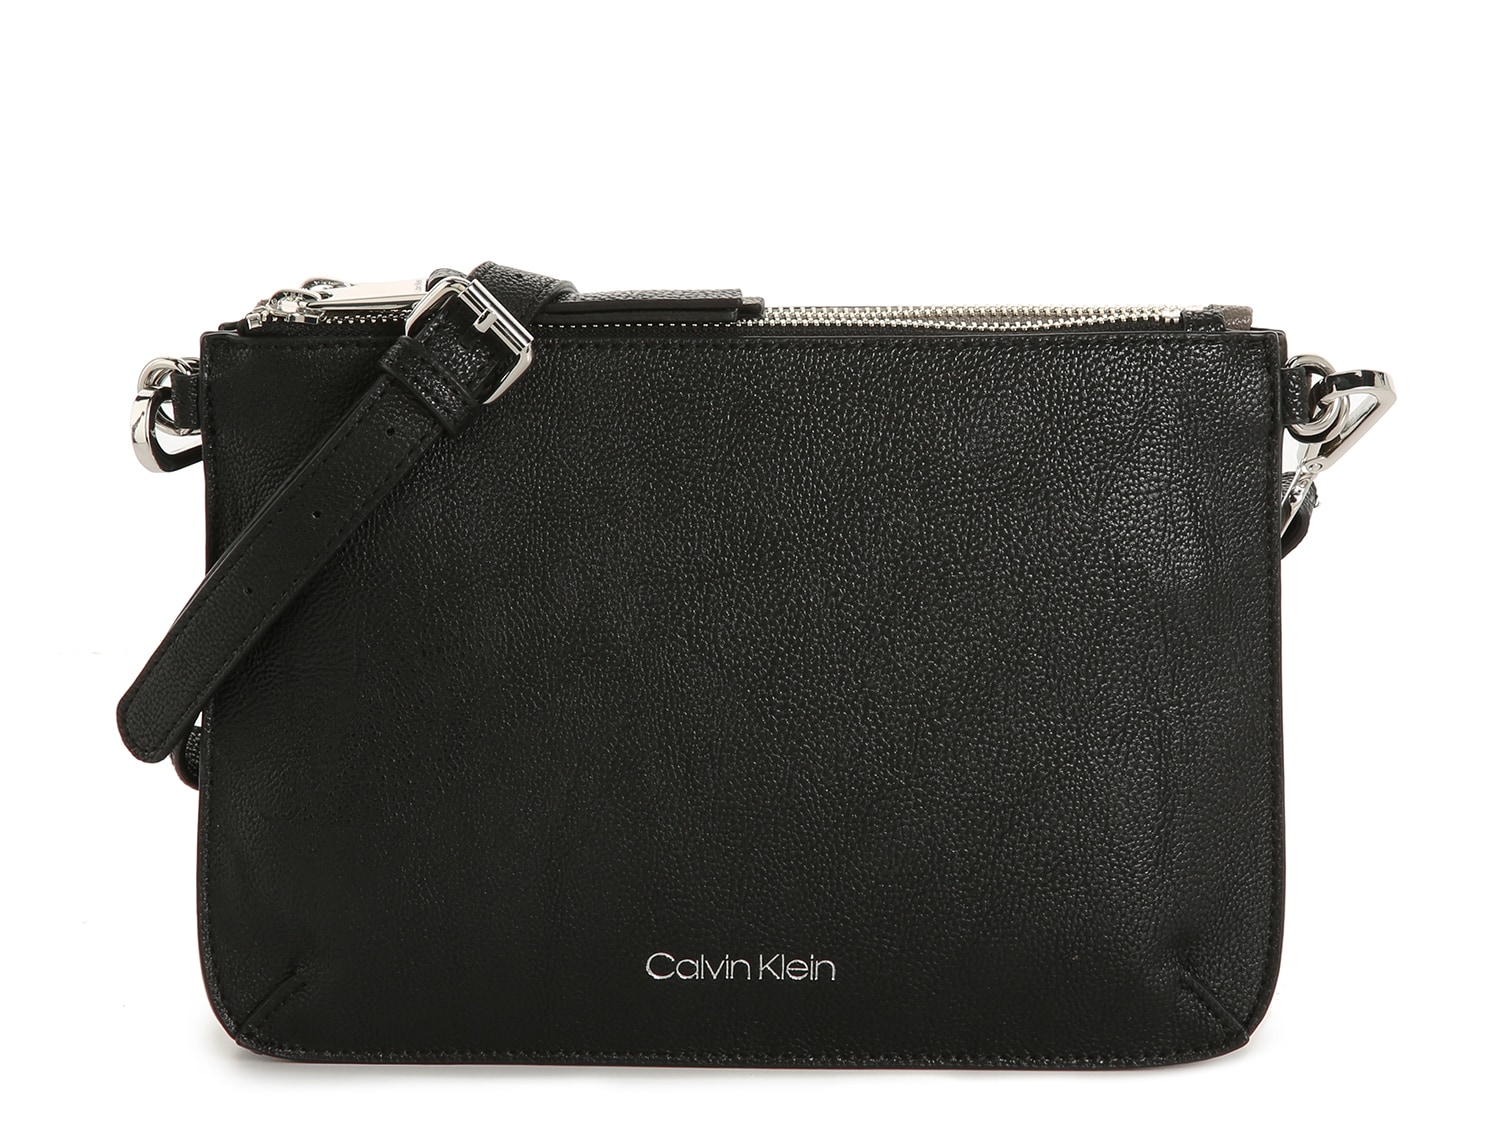 ck bags clearance